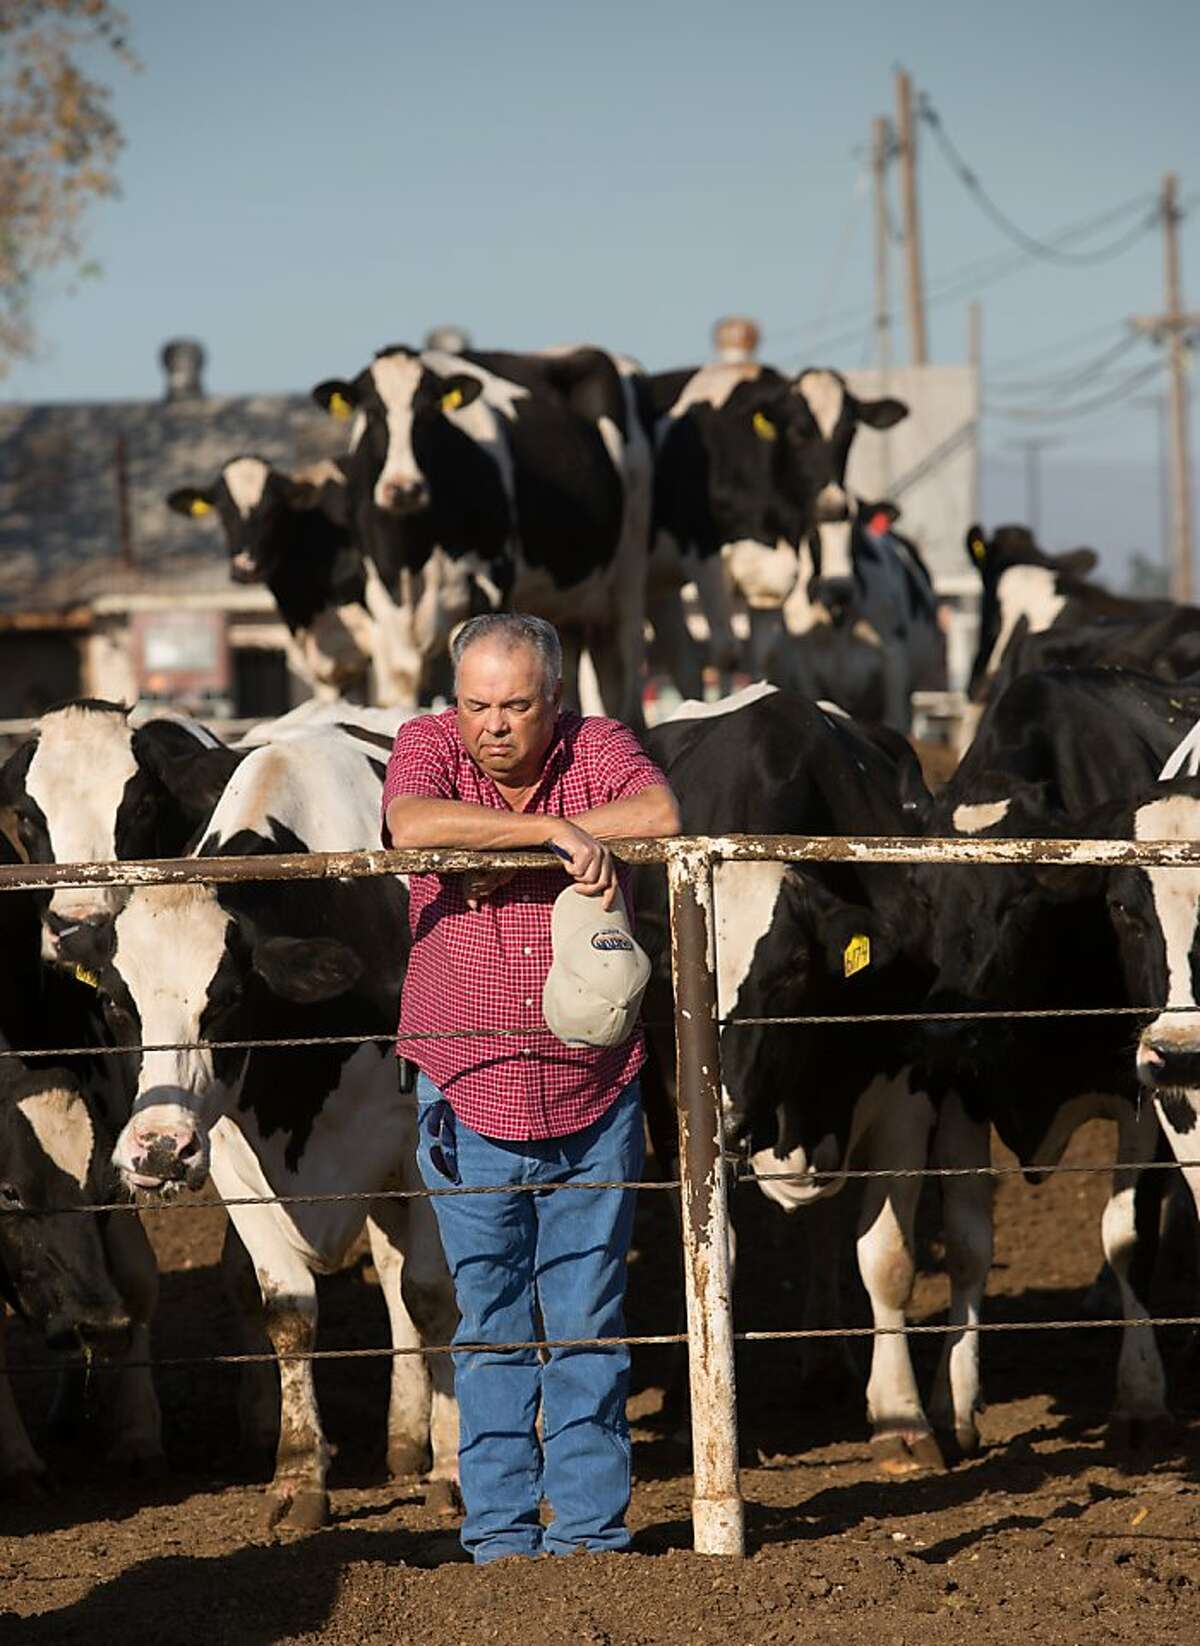 Ray Souza stands in a pen of some his dairy cows at his dairy farm in Turlock, CA on Tuesday, October 9, 2012. Feed costs have skyrocketed over the past several years and the recent rise in the price of milk isn't enough for him to stop losing money.